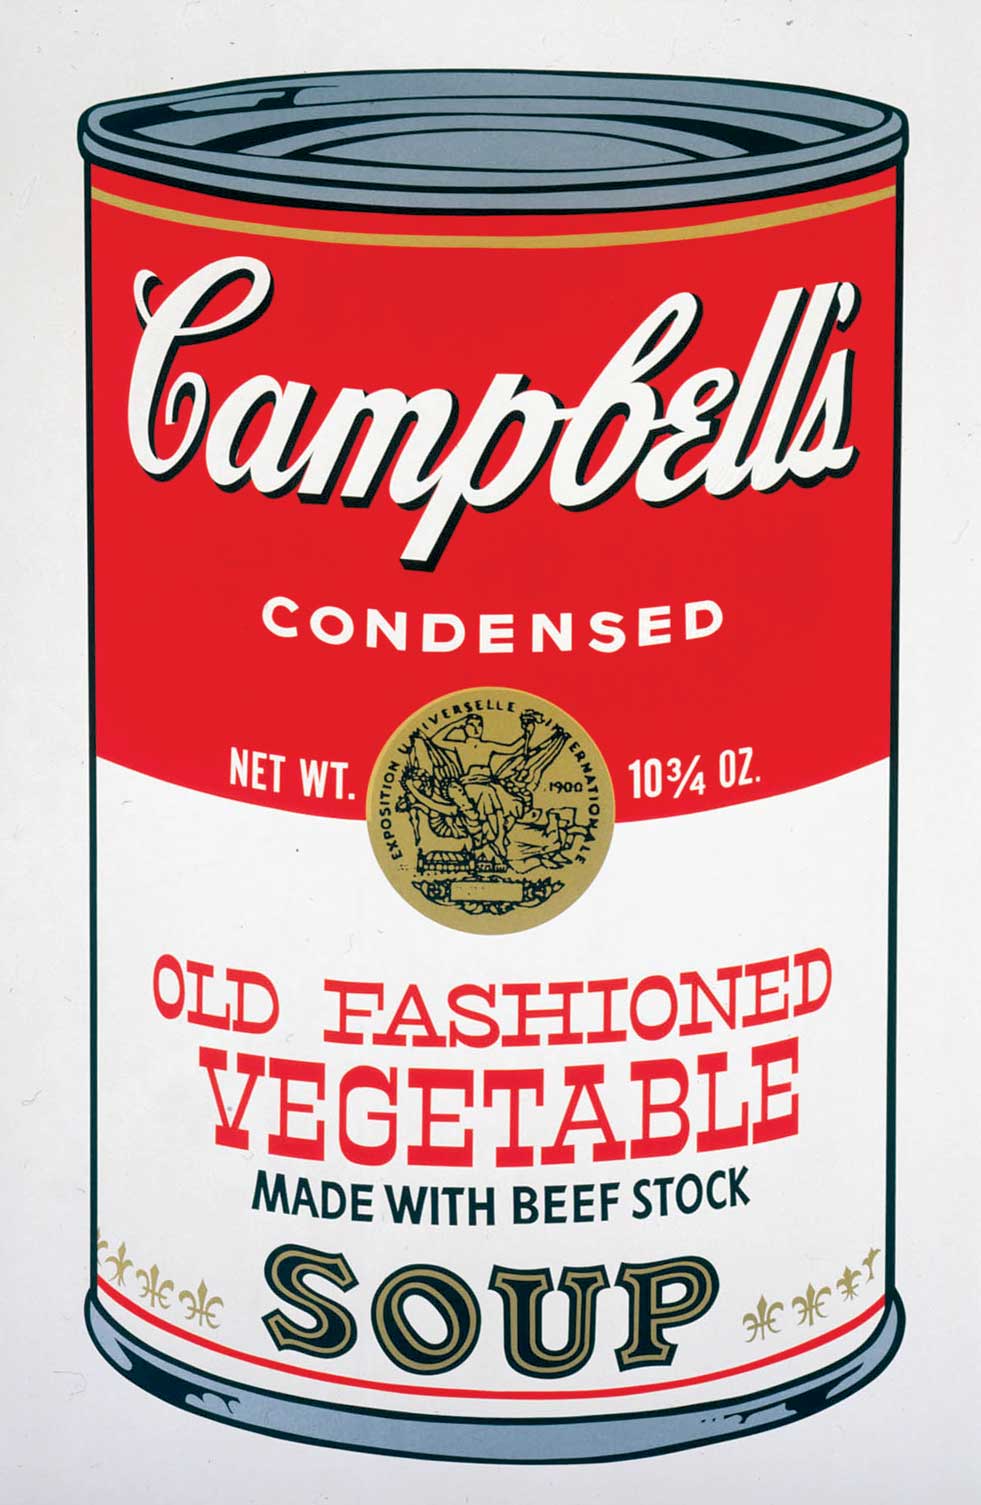 essays_campbell-soup_02_f